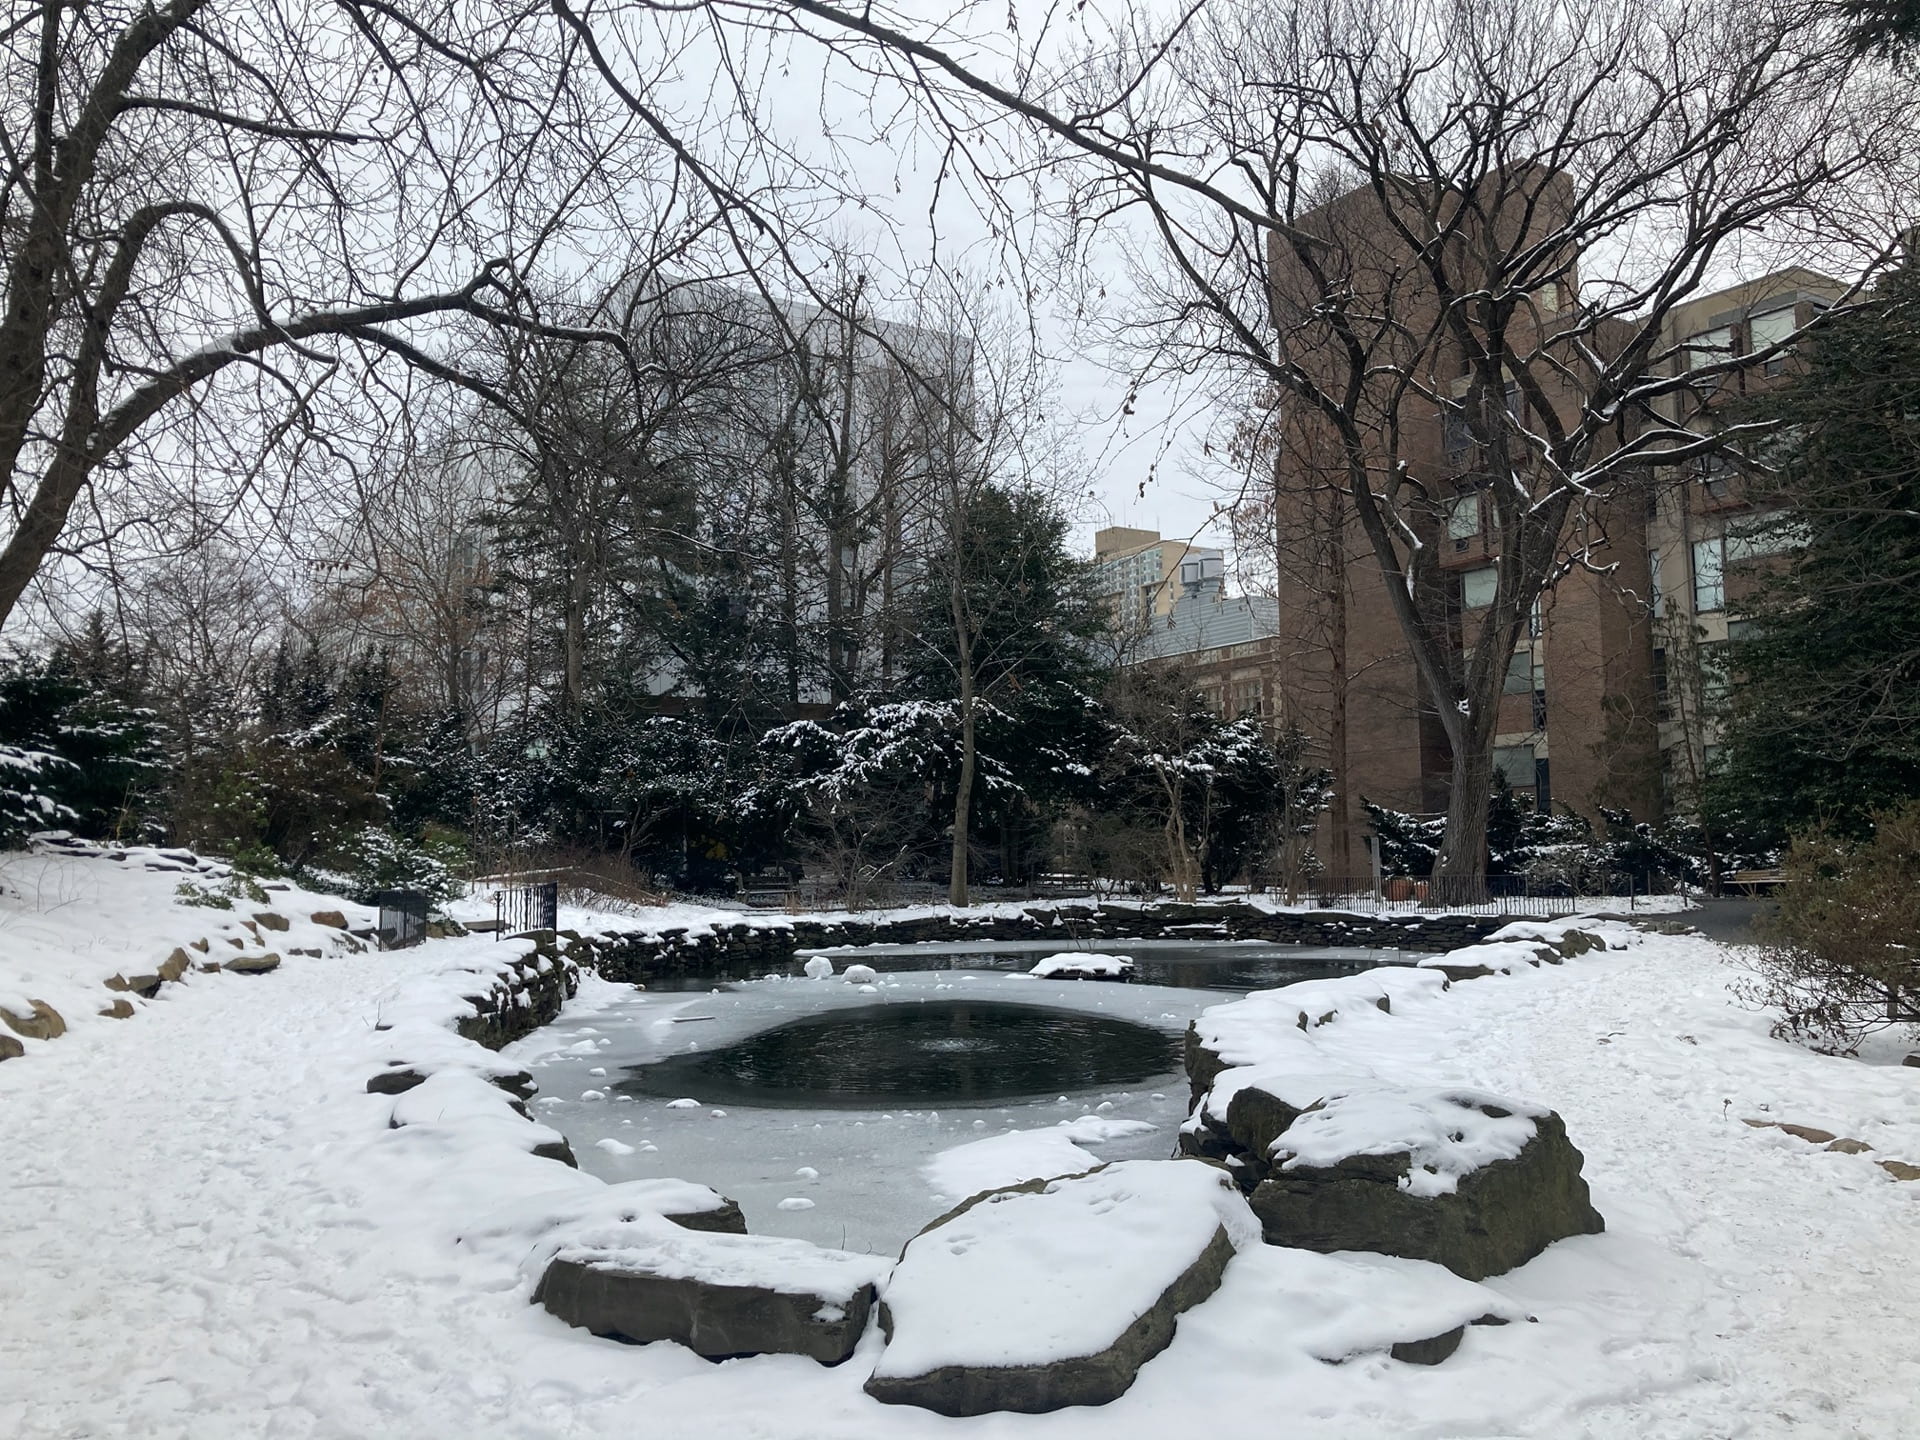 A narrow view of the BioPond, covered in snow.